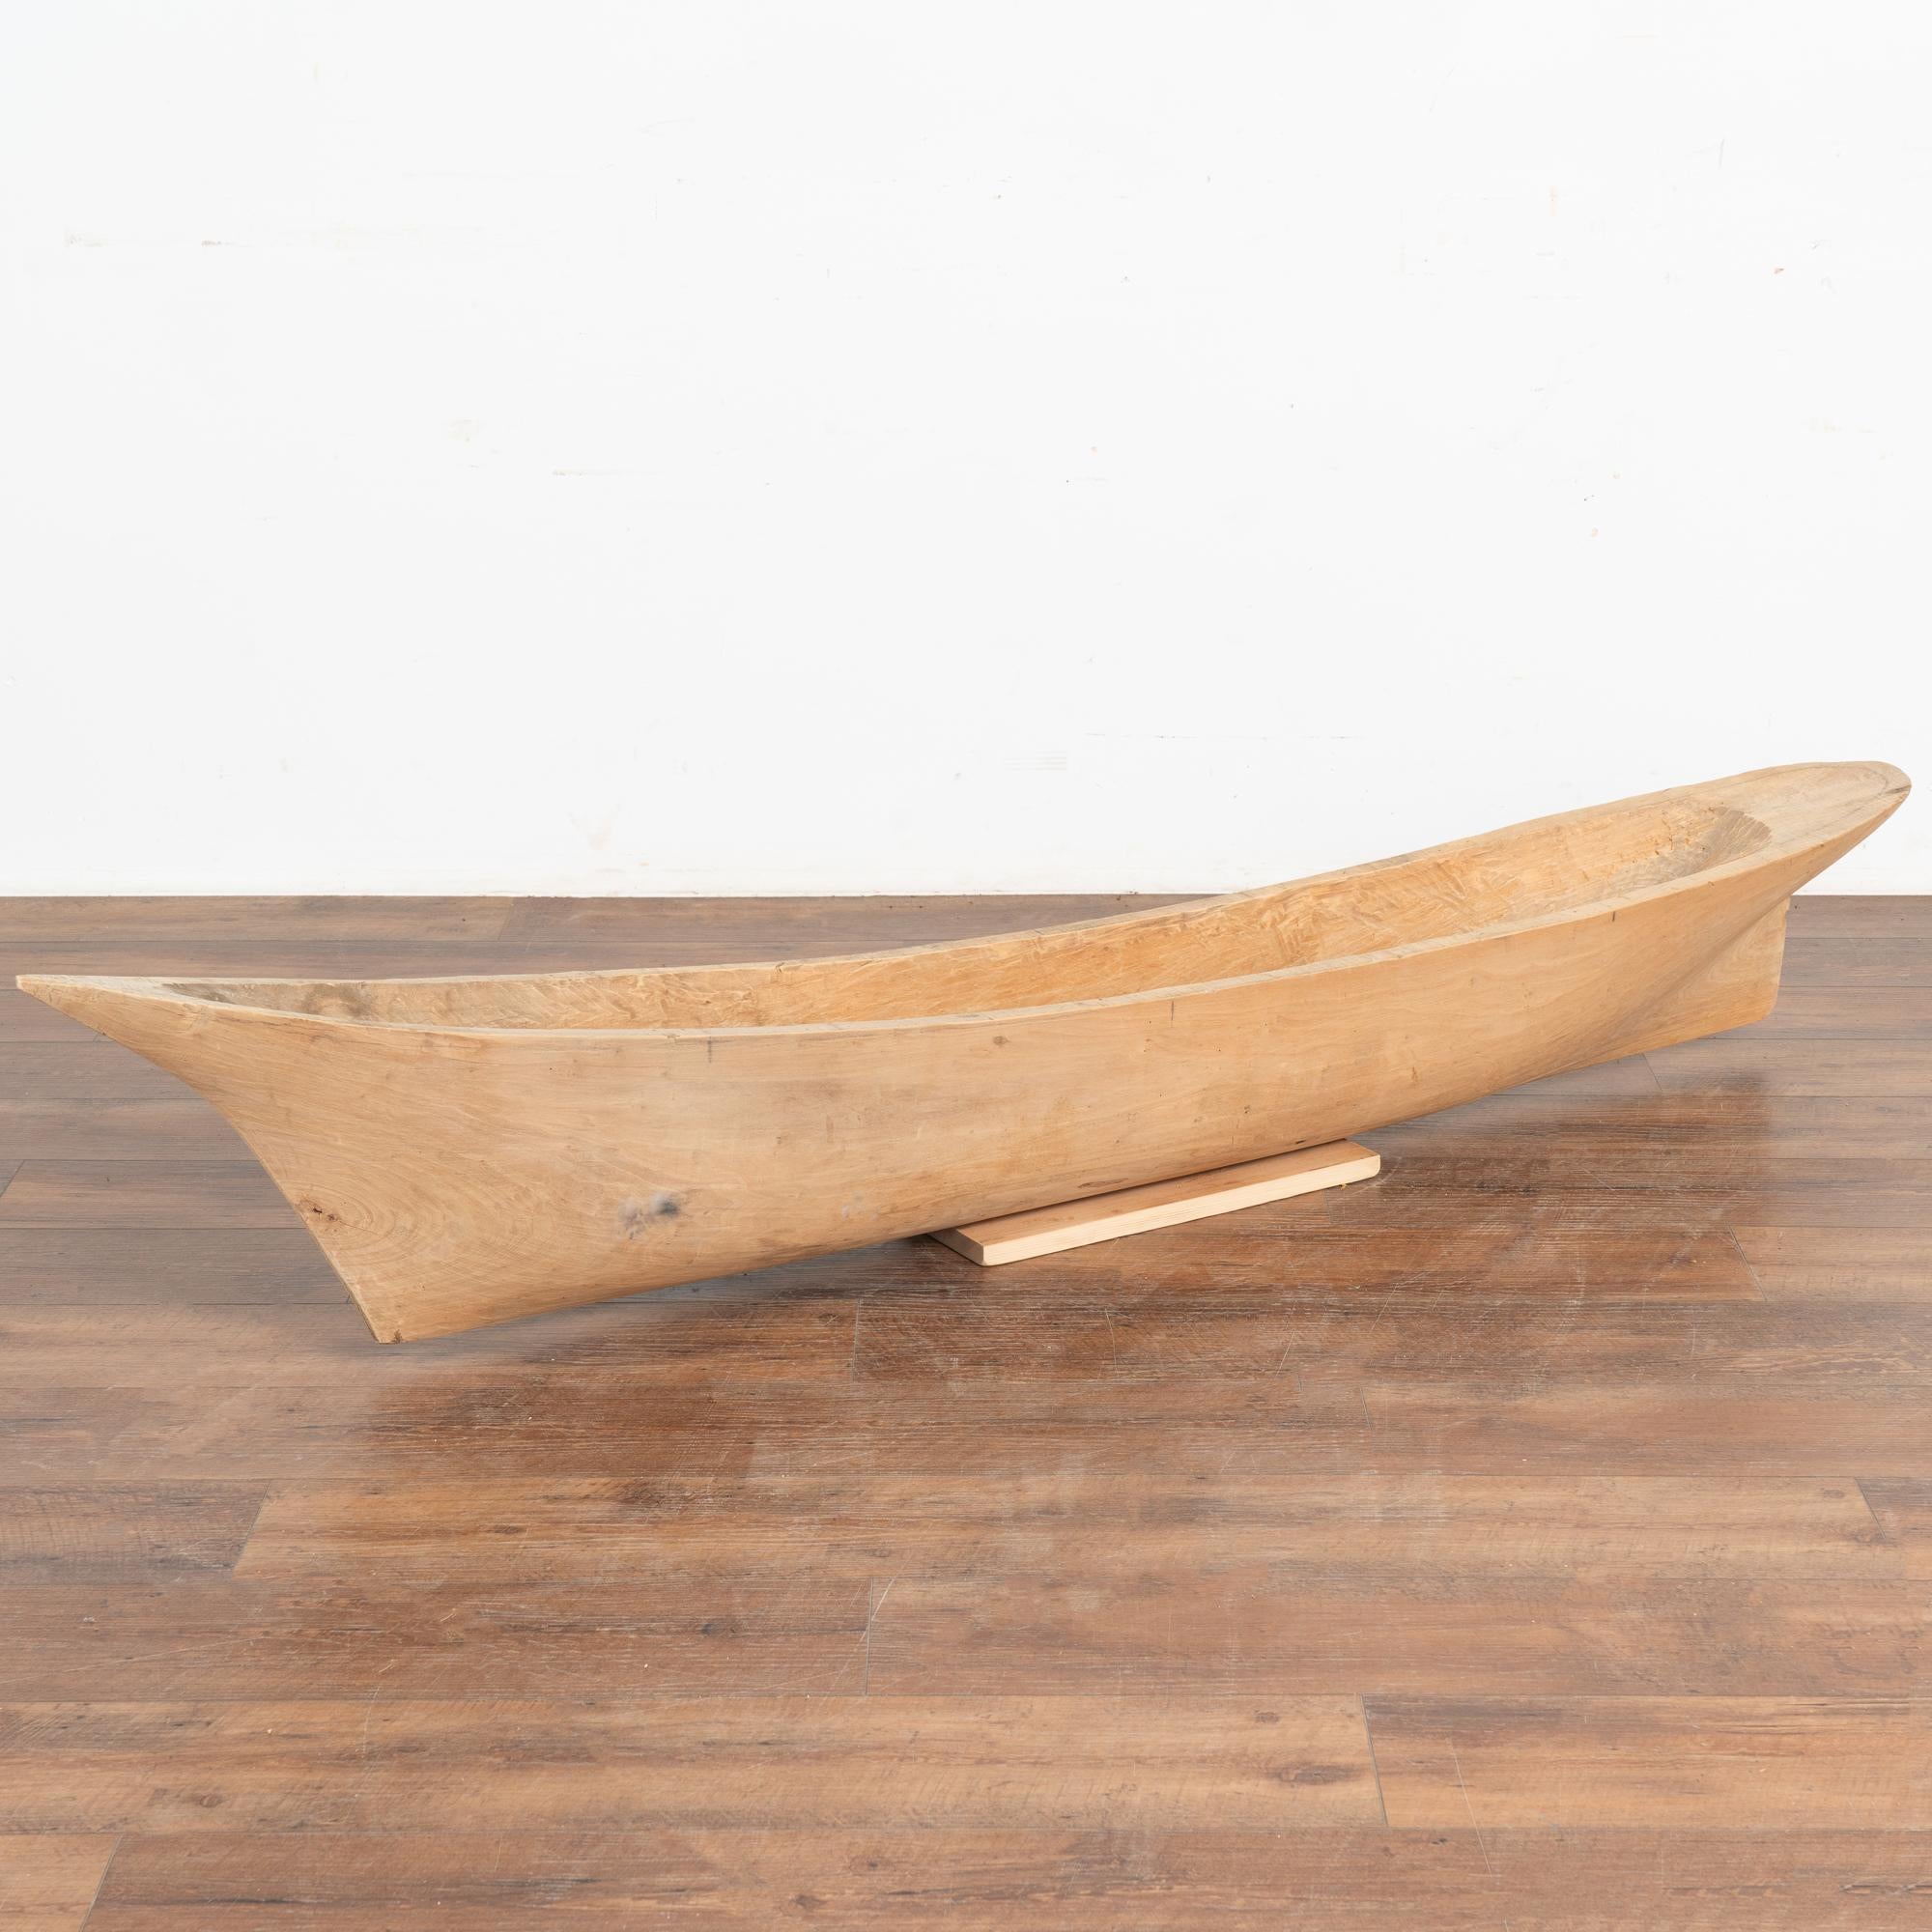 This large model boat was crafted in Denmark in the 1900's. At just over 6' long, the large size makes it a unique decorative statement piece.
Note it is hand-hewn and carved out of one large log.
Solid and stable, any scratches, cracks, dings, etc.